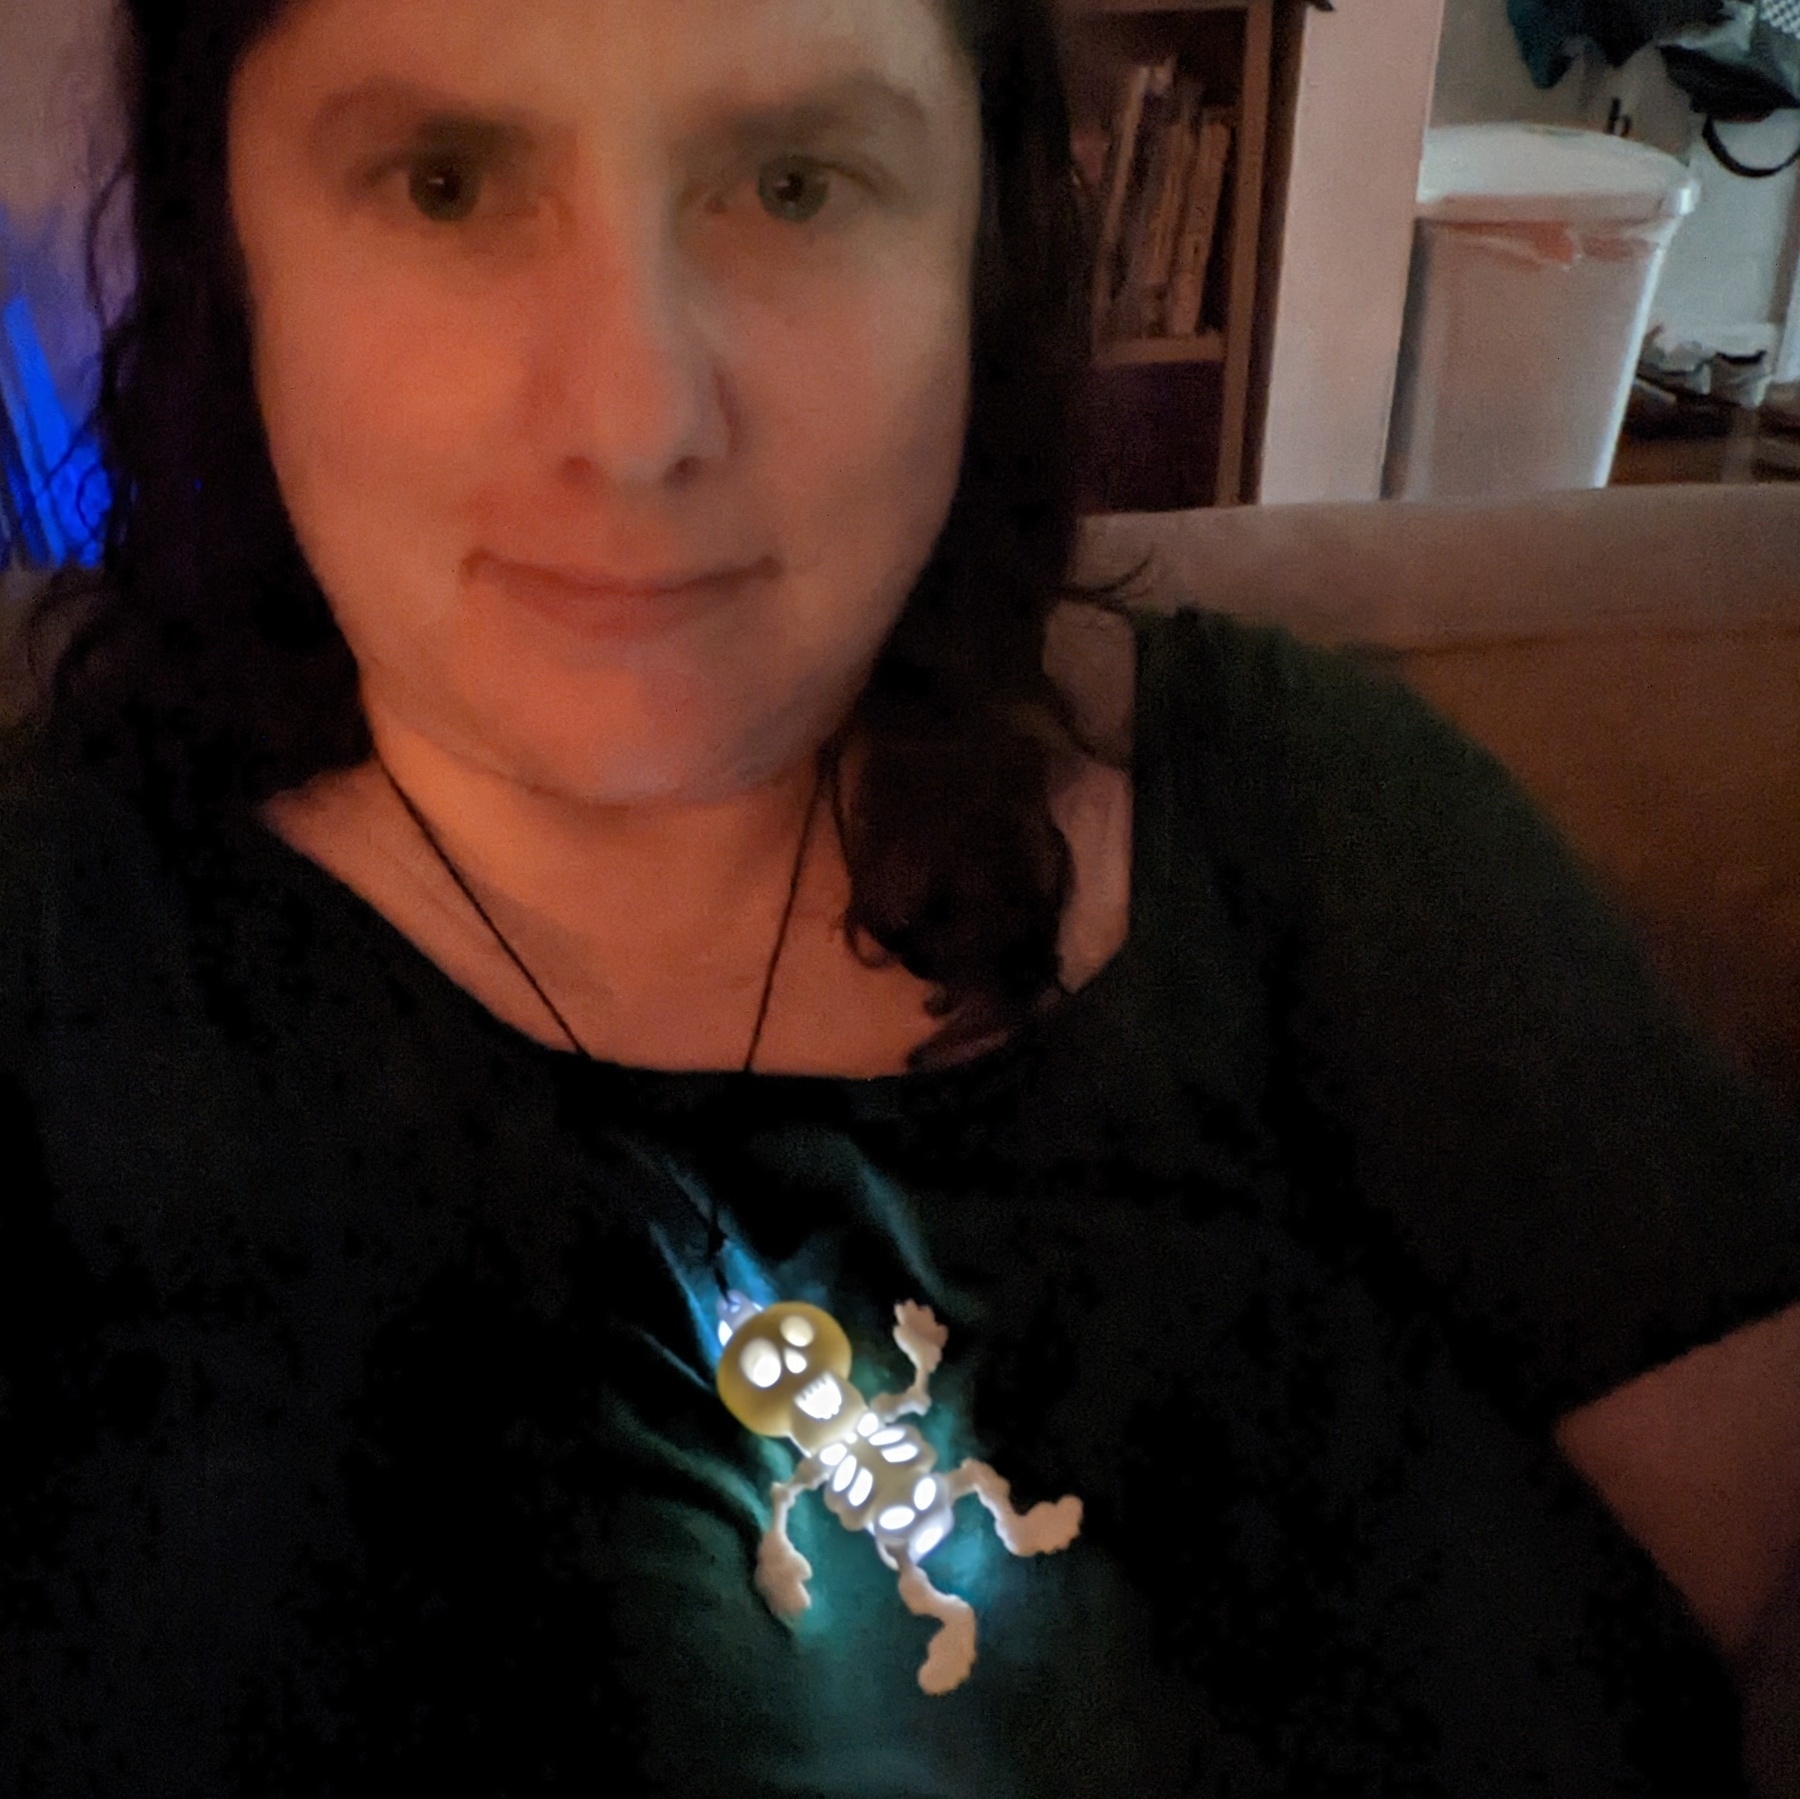 A white woman wears a skeleton-shaped necklace with a white glow stick inside it.